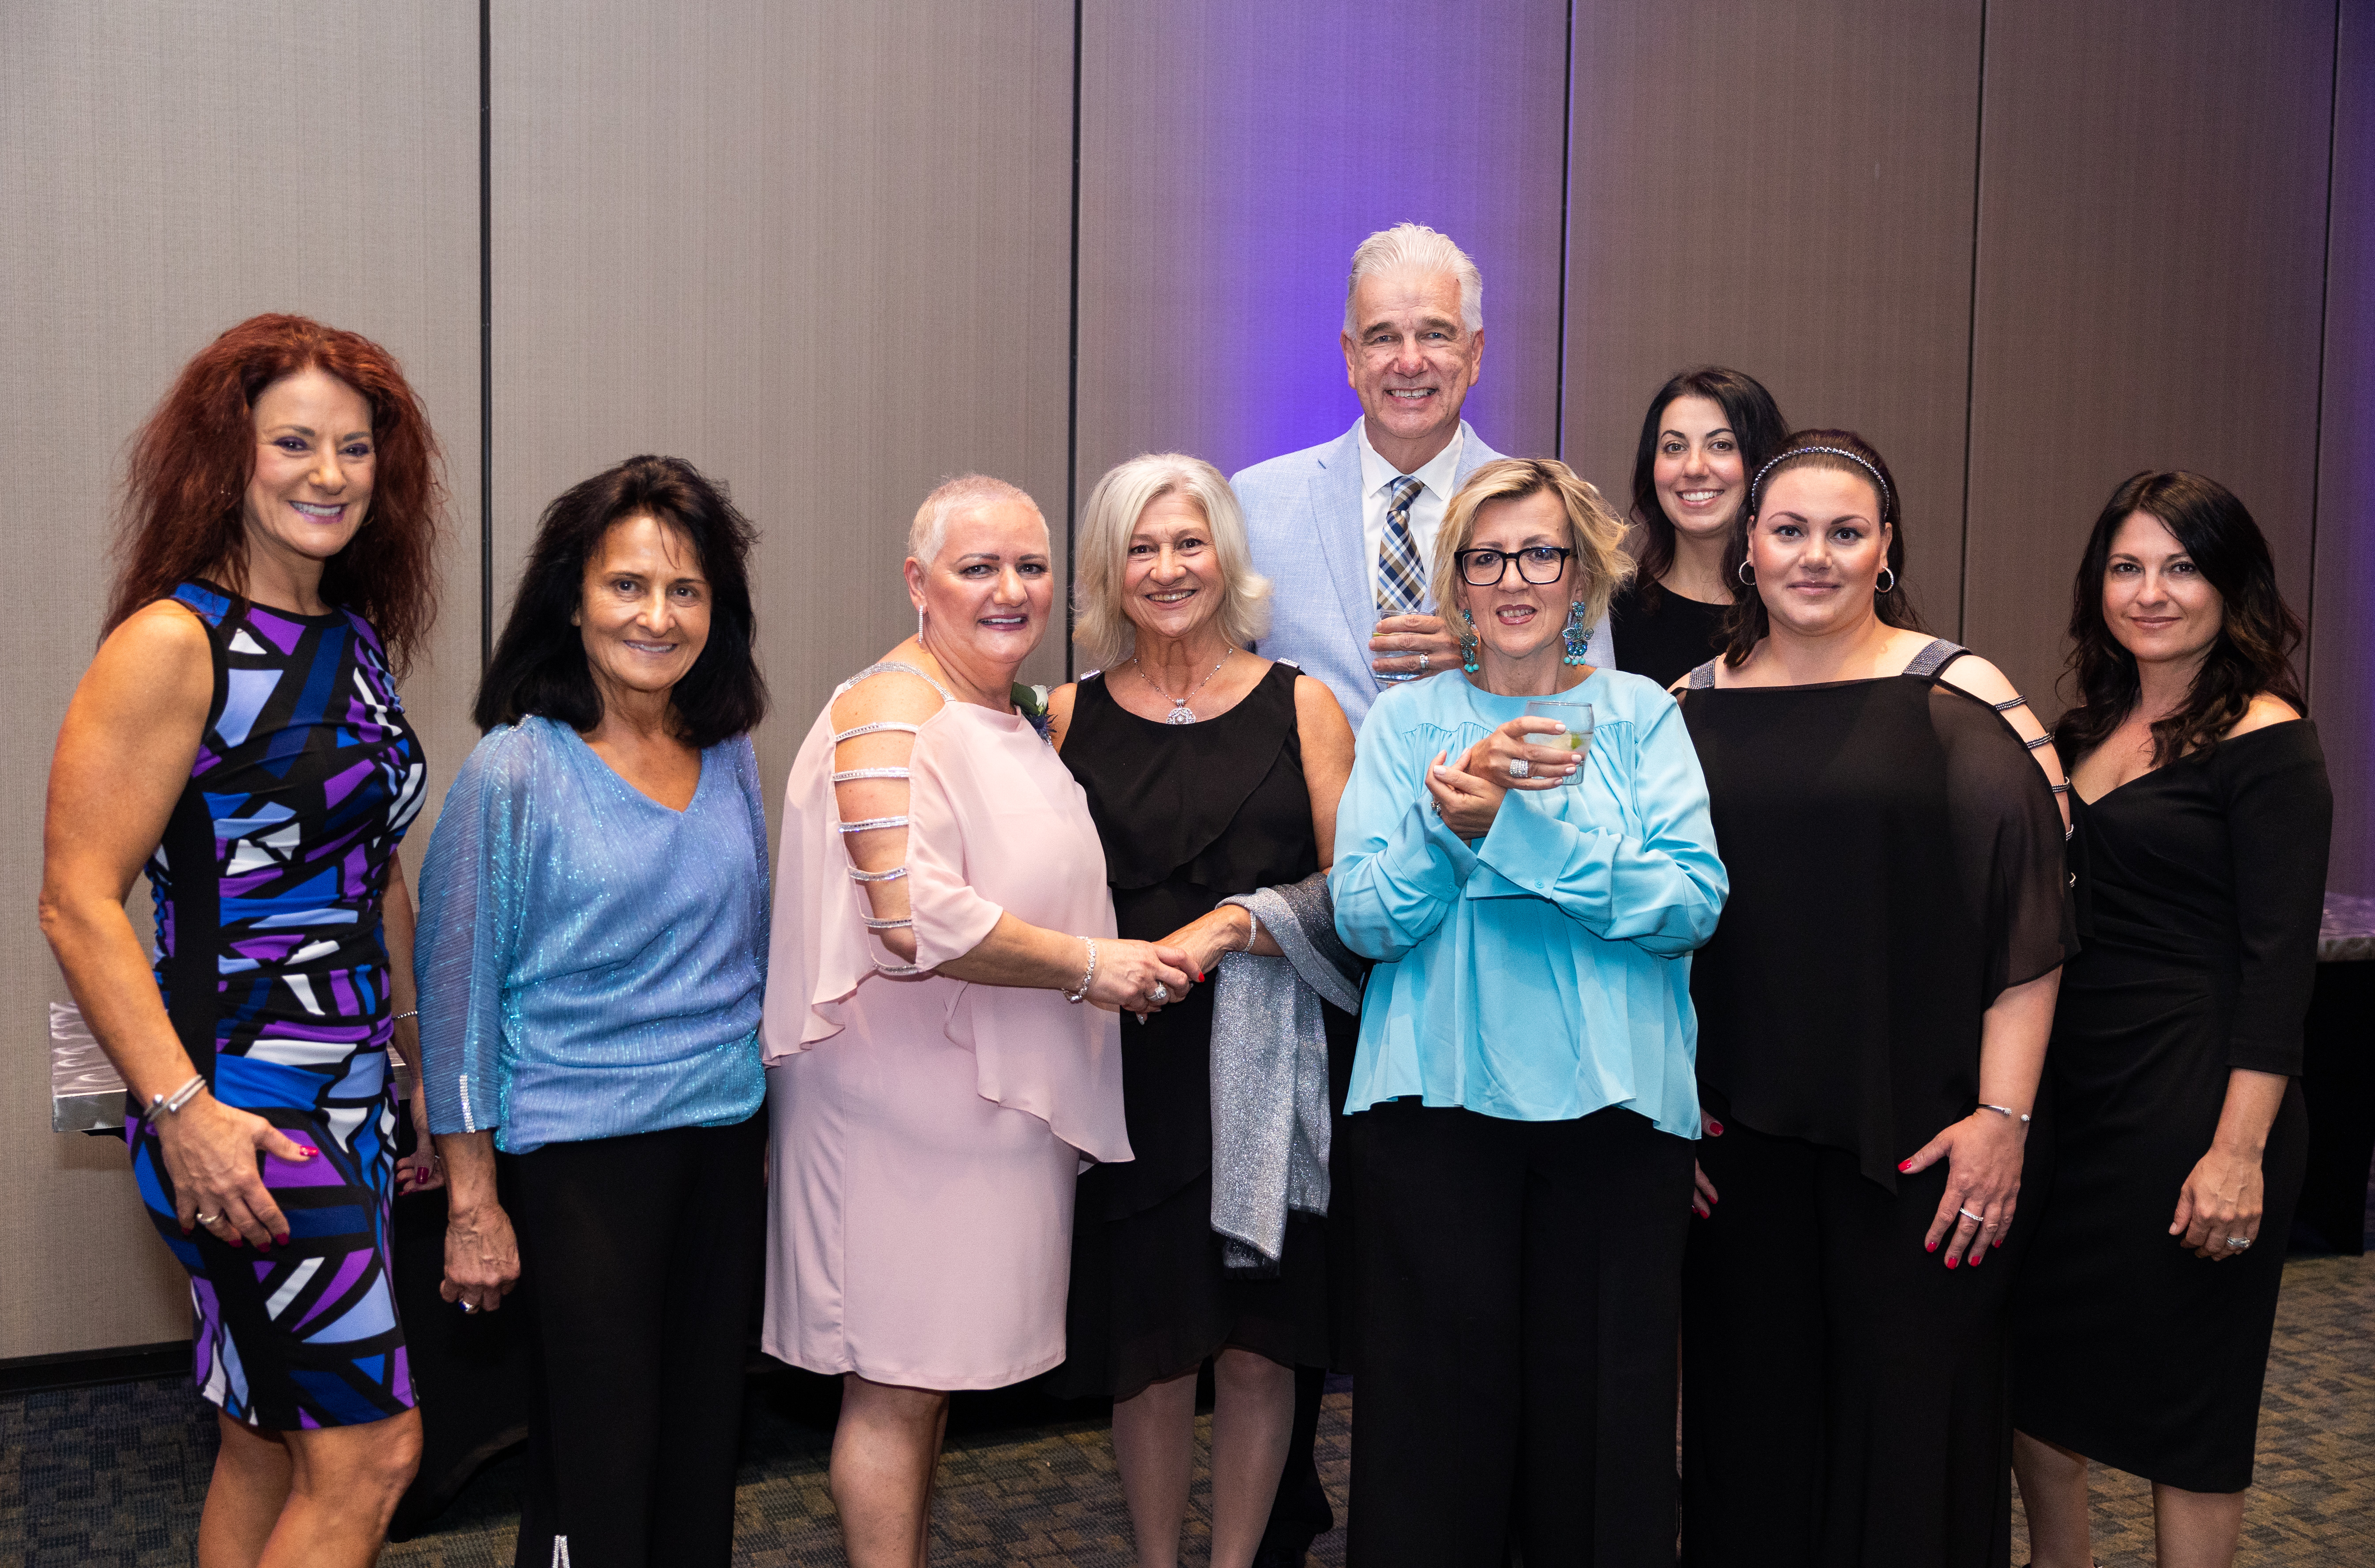 A group of finalists and guests at the 25th annual Howdy Awards for Hospitality Excellence held at the MassMutual Center Monday evening, May 16, 2022. (Hoang ‘Leon’ Nguyen / The Republican)